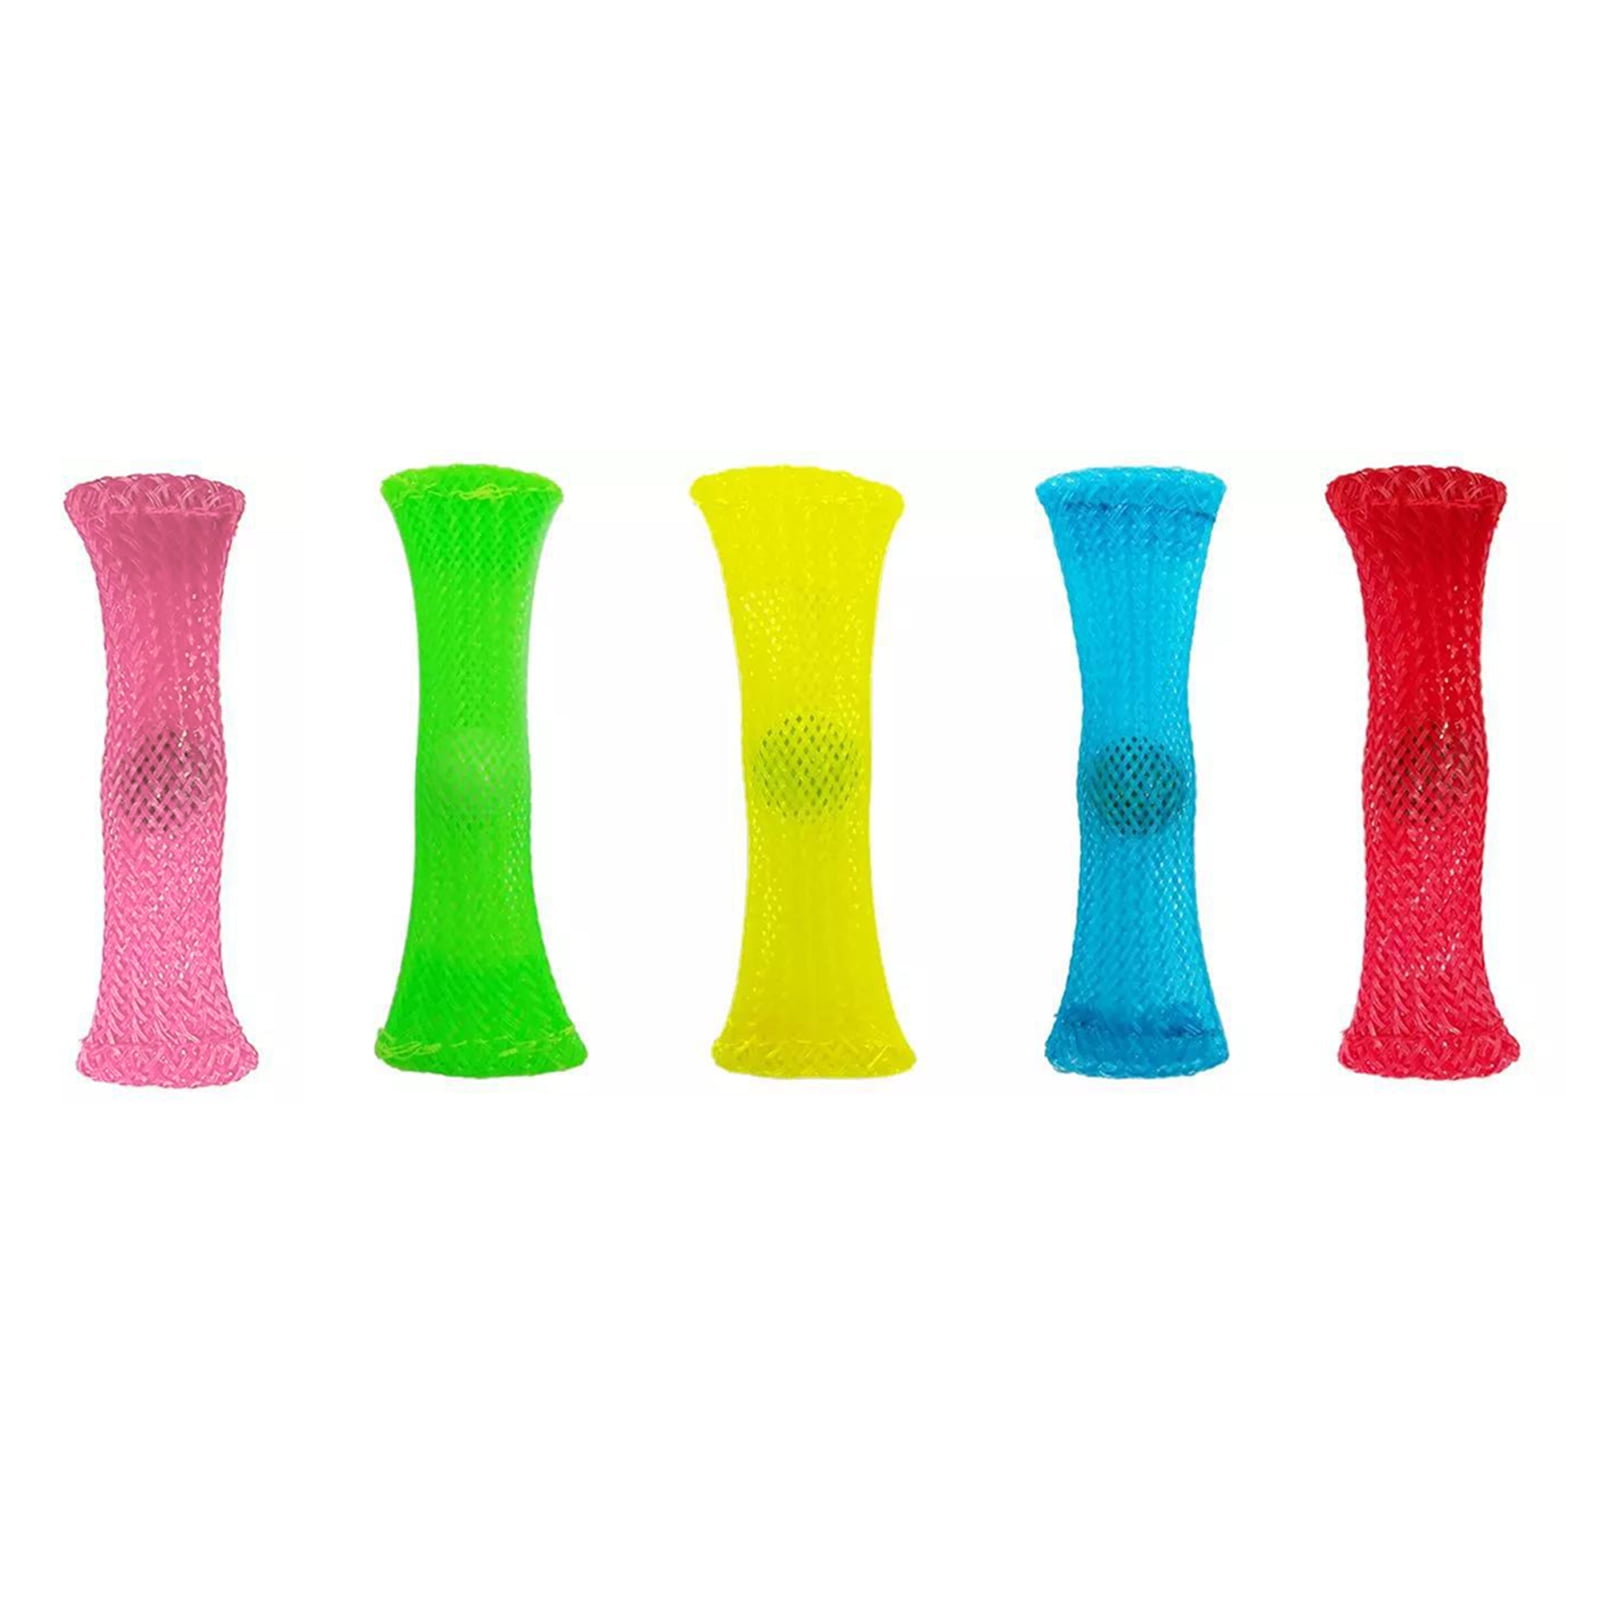 Details about   Marble Mesh Fidget Tube Stress Relief Hand Kids Adults ADHD Toy HOT AU 